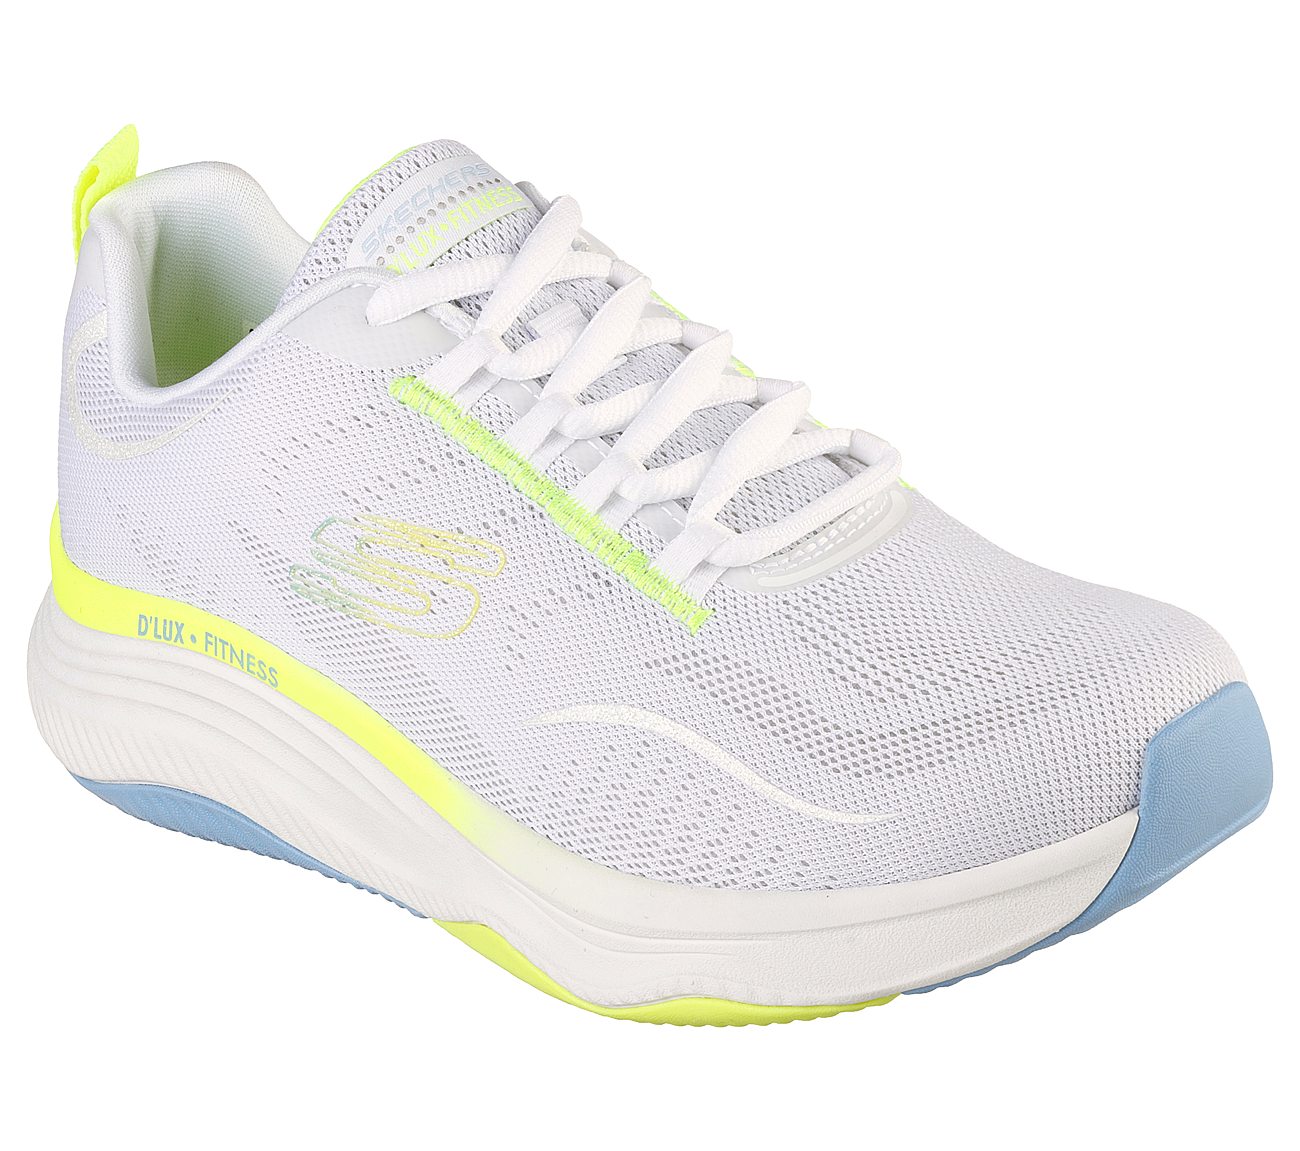 D'LUX FITNESS, WHITE/MULTI Footwear Right View